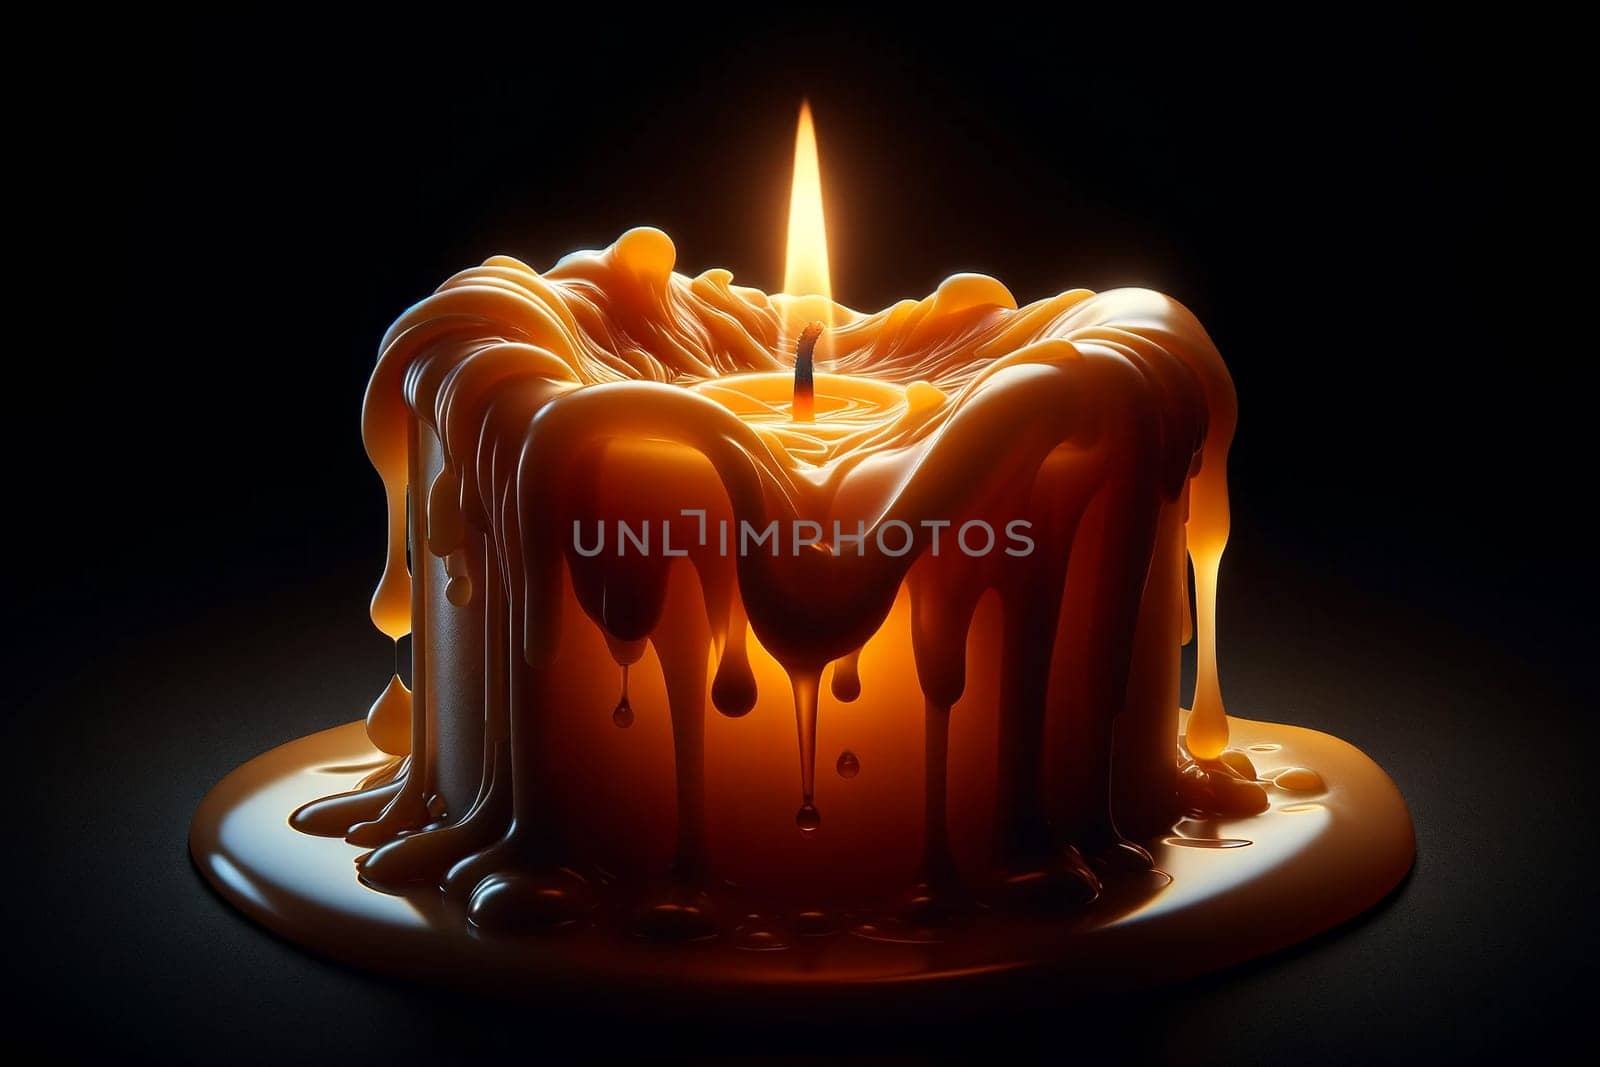 burning wax candle on a black background, conveying the detailed texture of melting wax and the warm glow of the flame by Annado